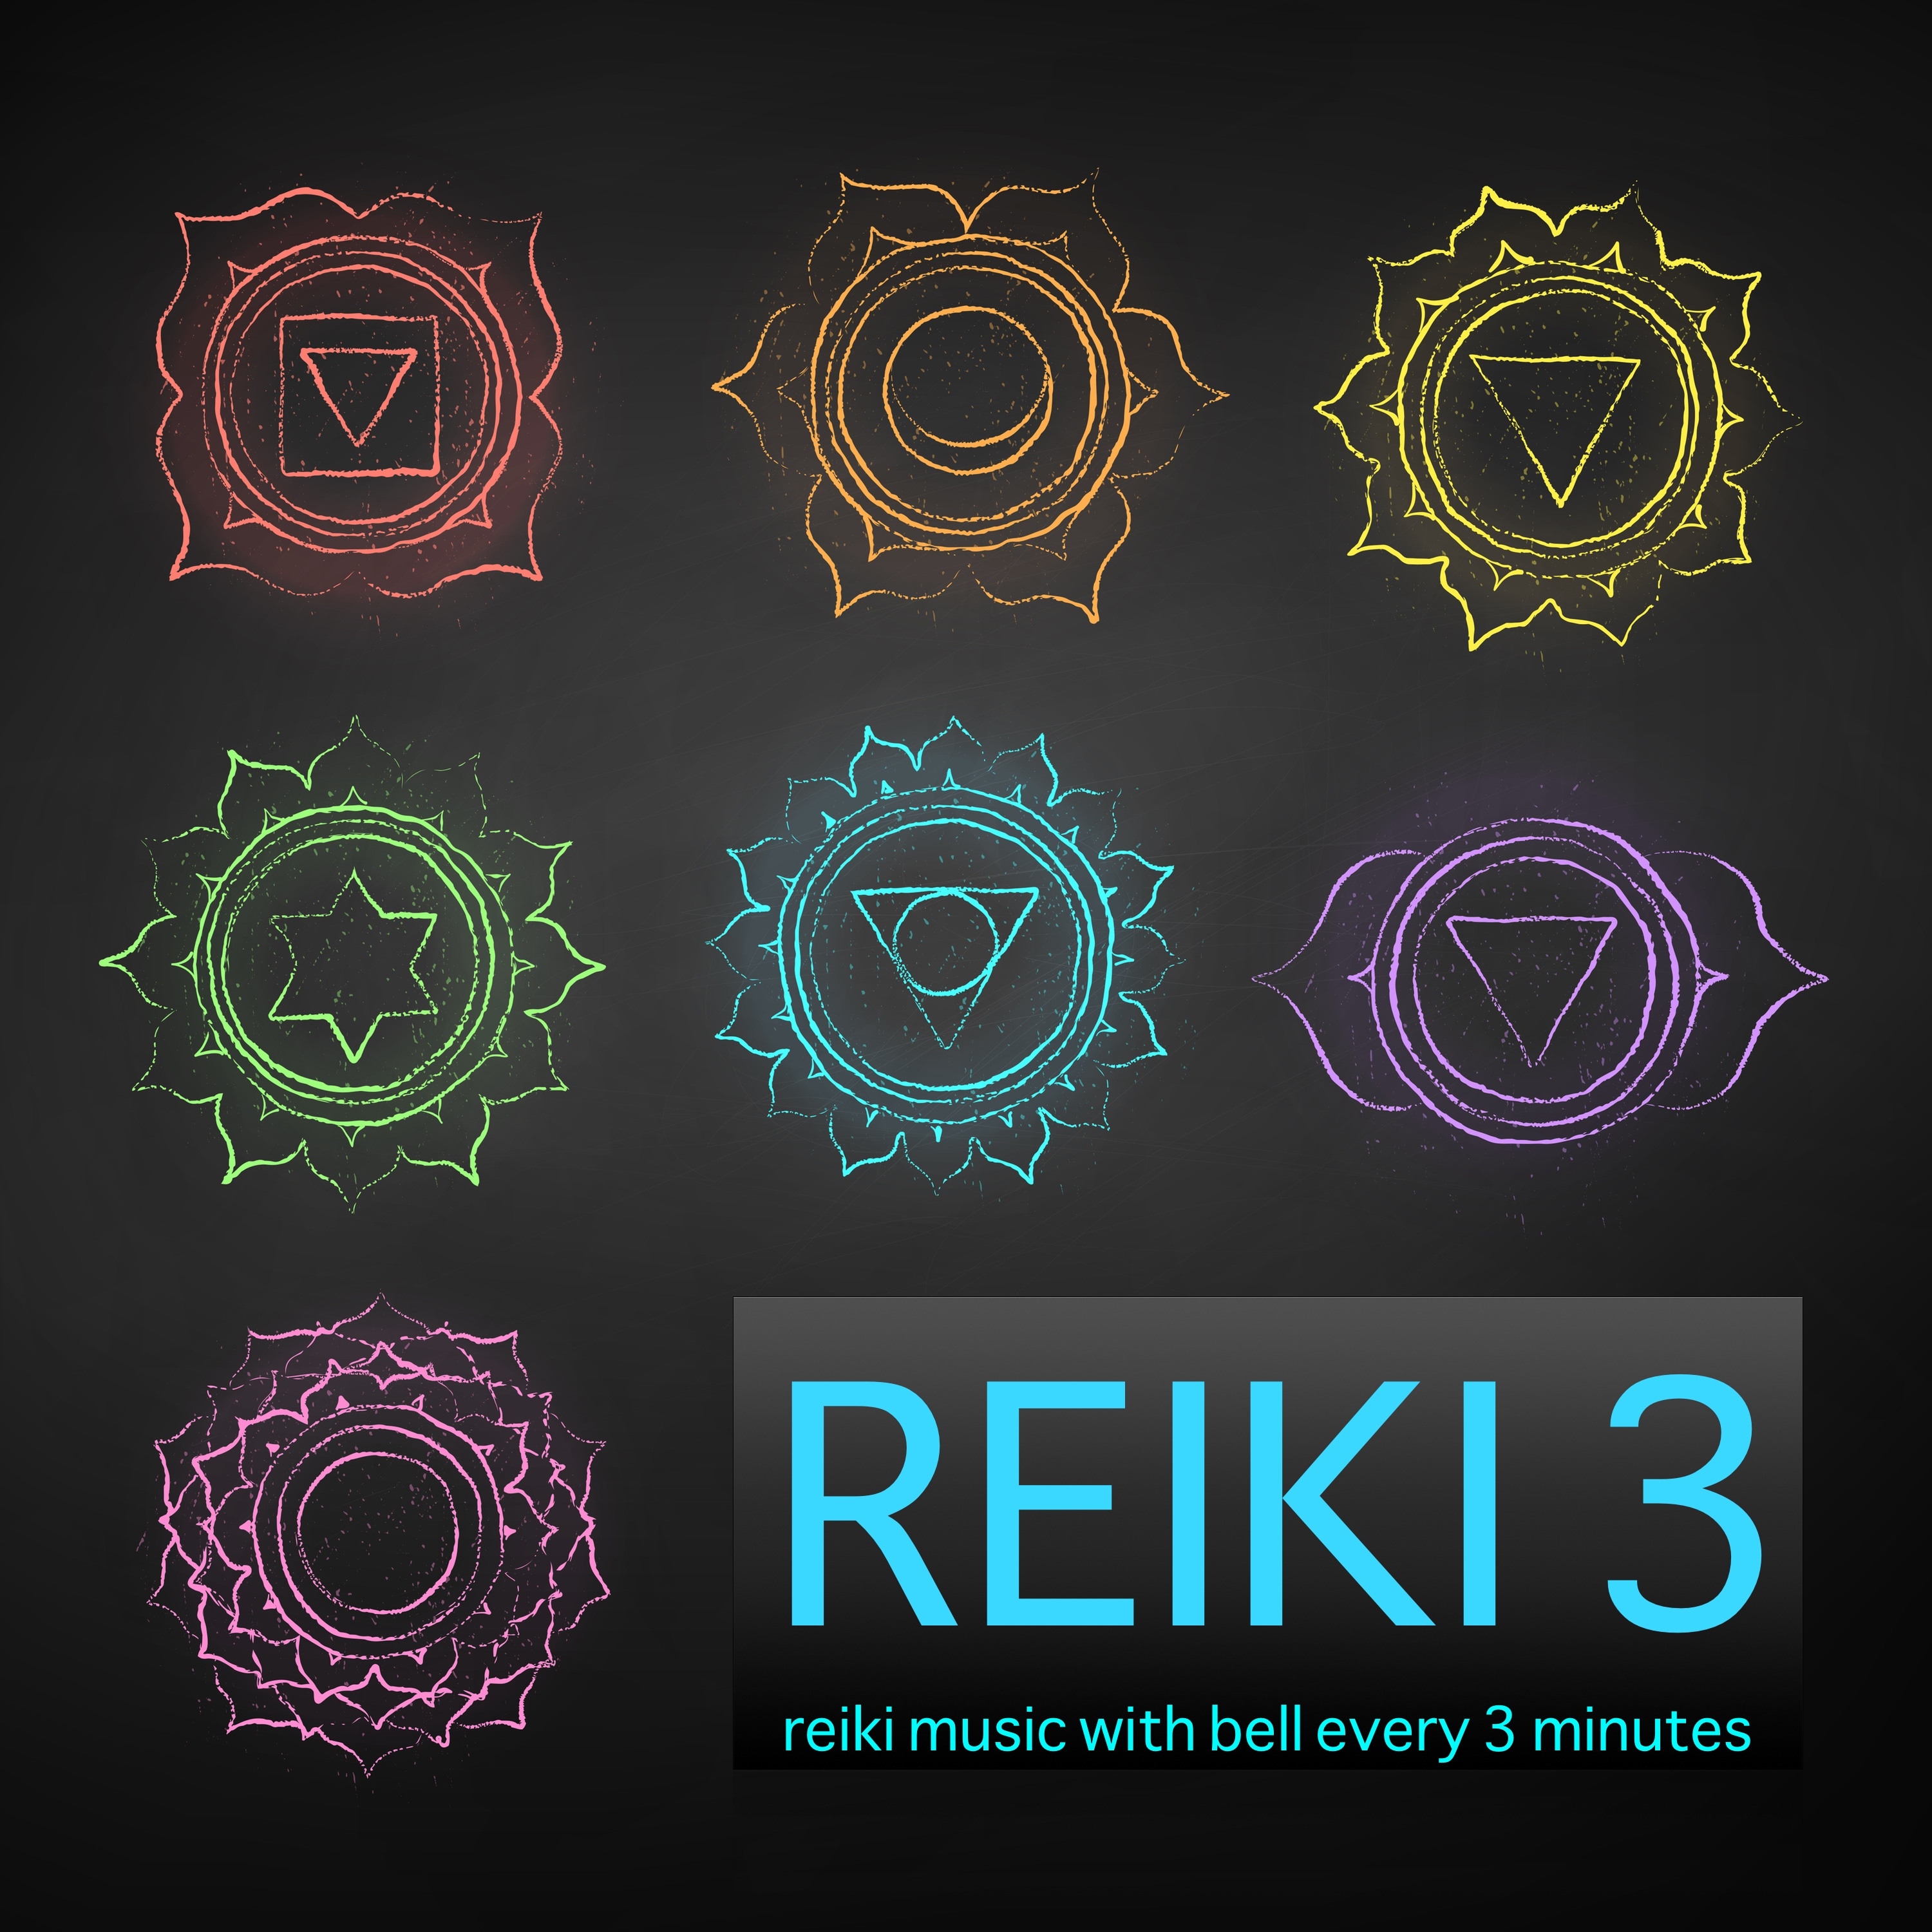 Reiki Level 1 - Intense Reiki Music with Bell Every 3 Minutes